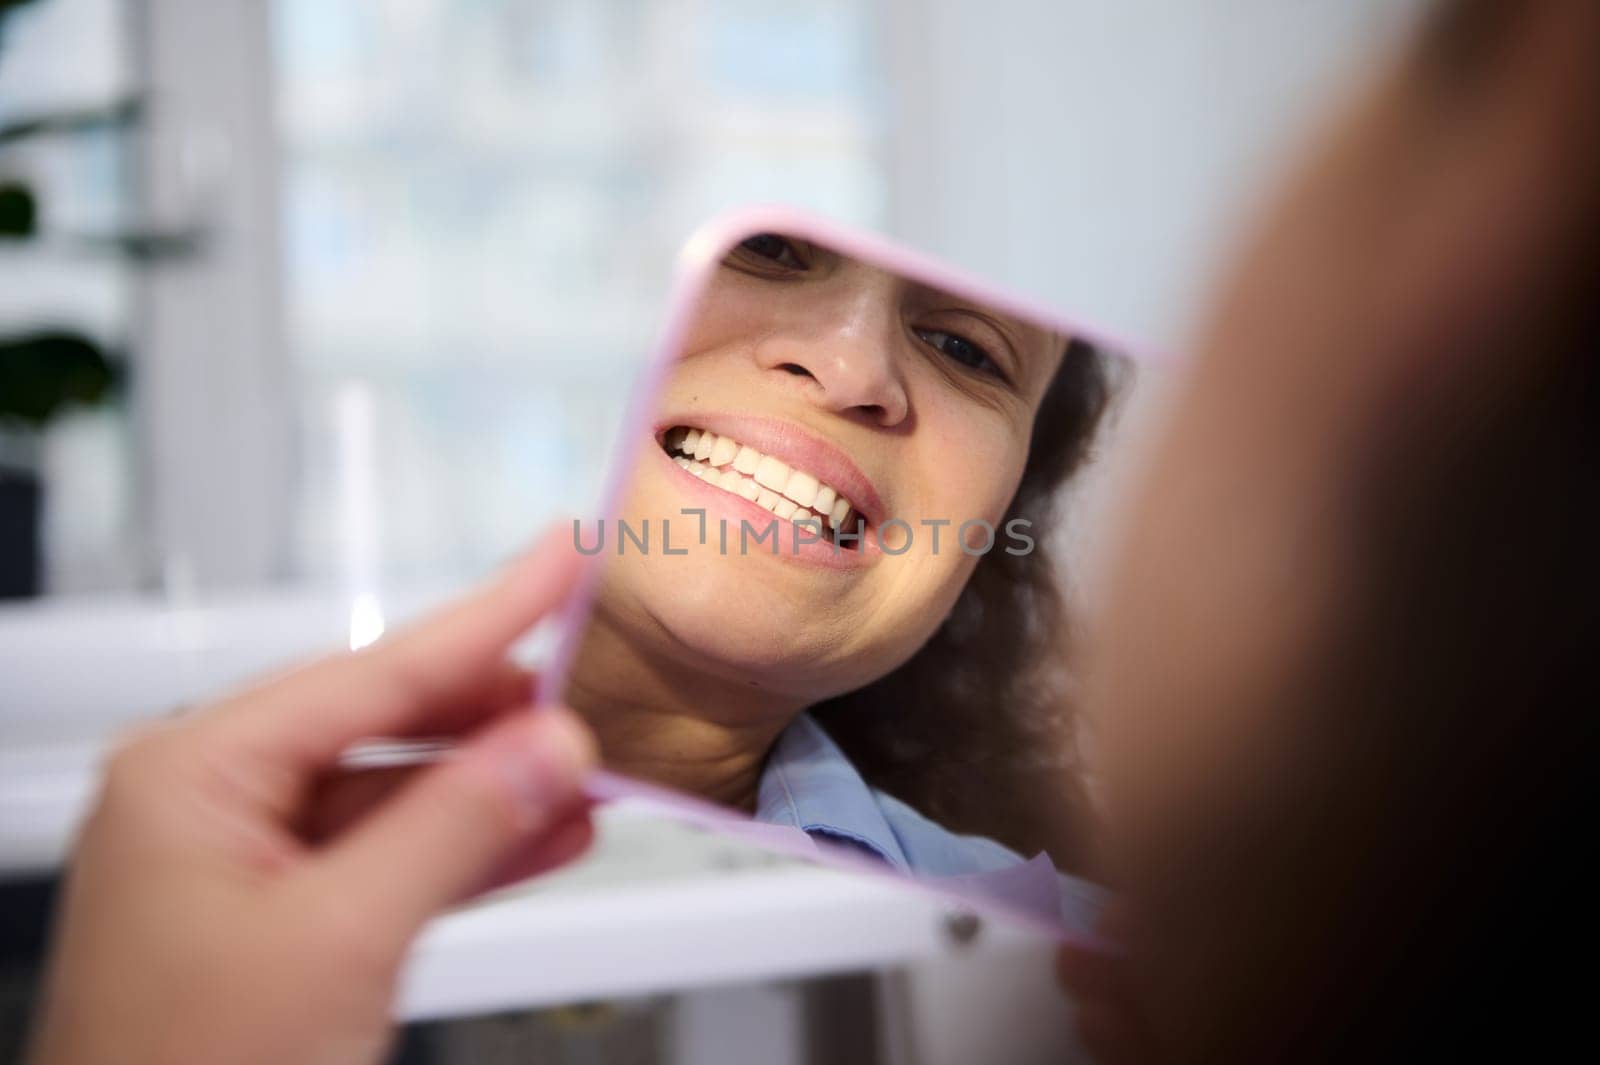 Reflection in mirror of a female patient in dental chair, admiring her smile and teeth after teeth bleaching procedure by artgf